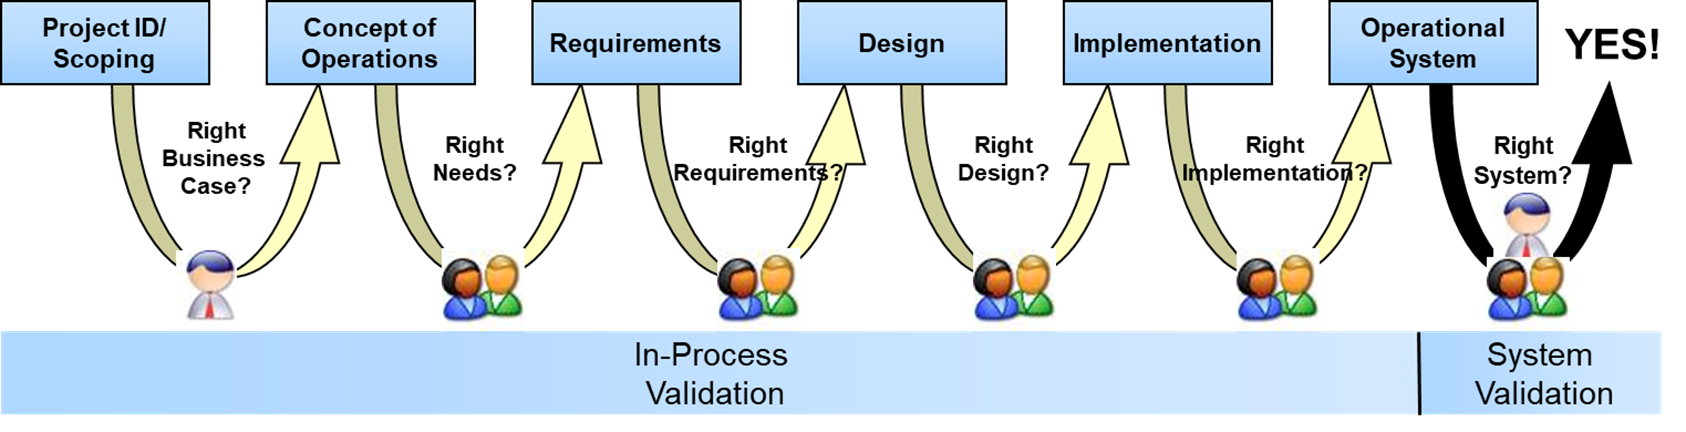 Figure shows how in process validation applies to the steps of the process, from Project Scoping to Implementation as described in the surrounding paragraphs.